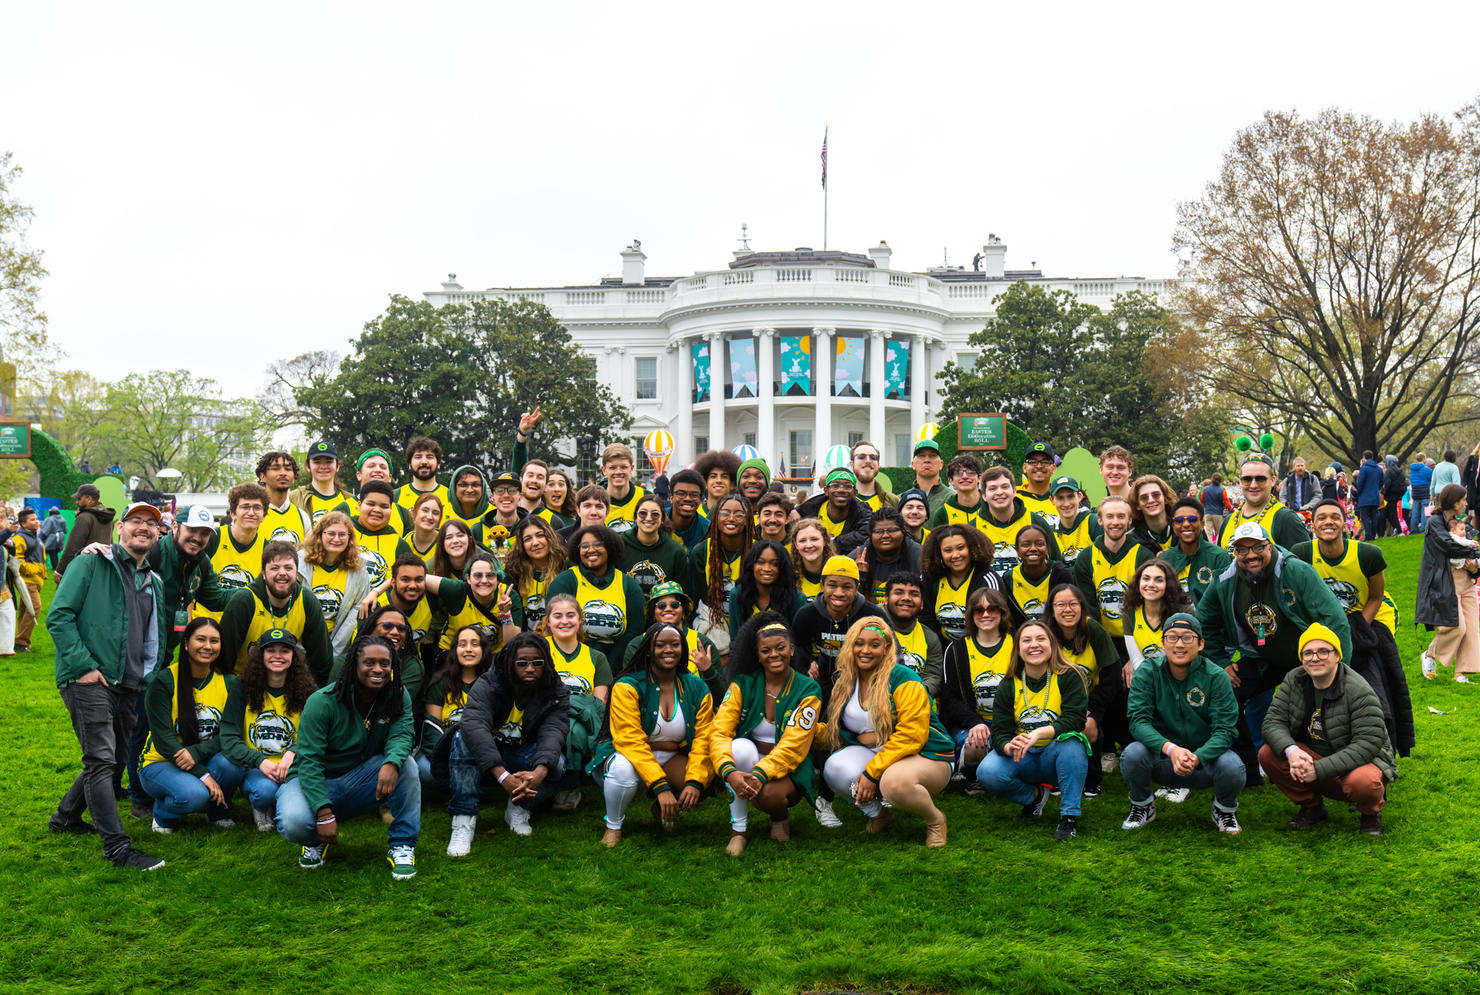 Students, faculty, and staff of the Green Machine Ensembles pose for a photo in front of the White House. Photo by Joshua Cruse & Nathaniel Henry / Green Machine Ensembles